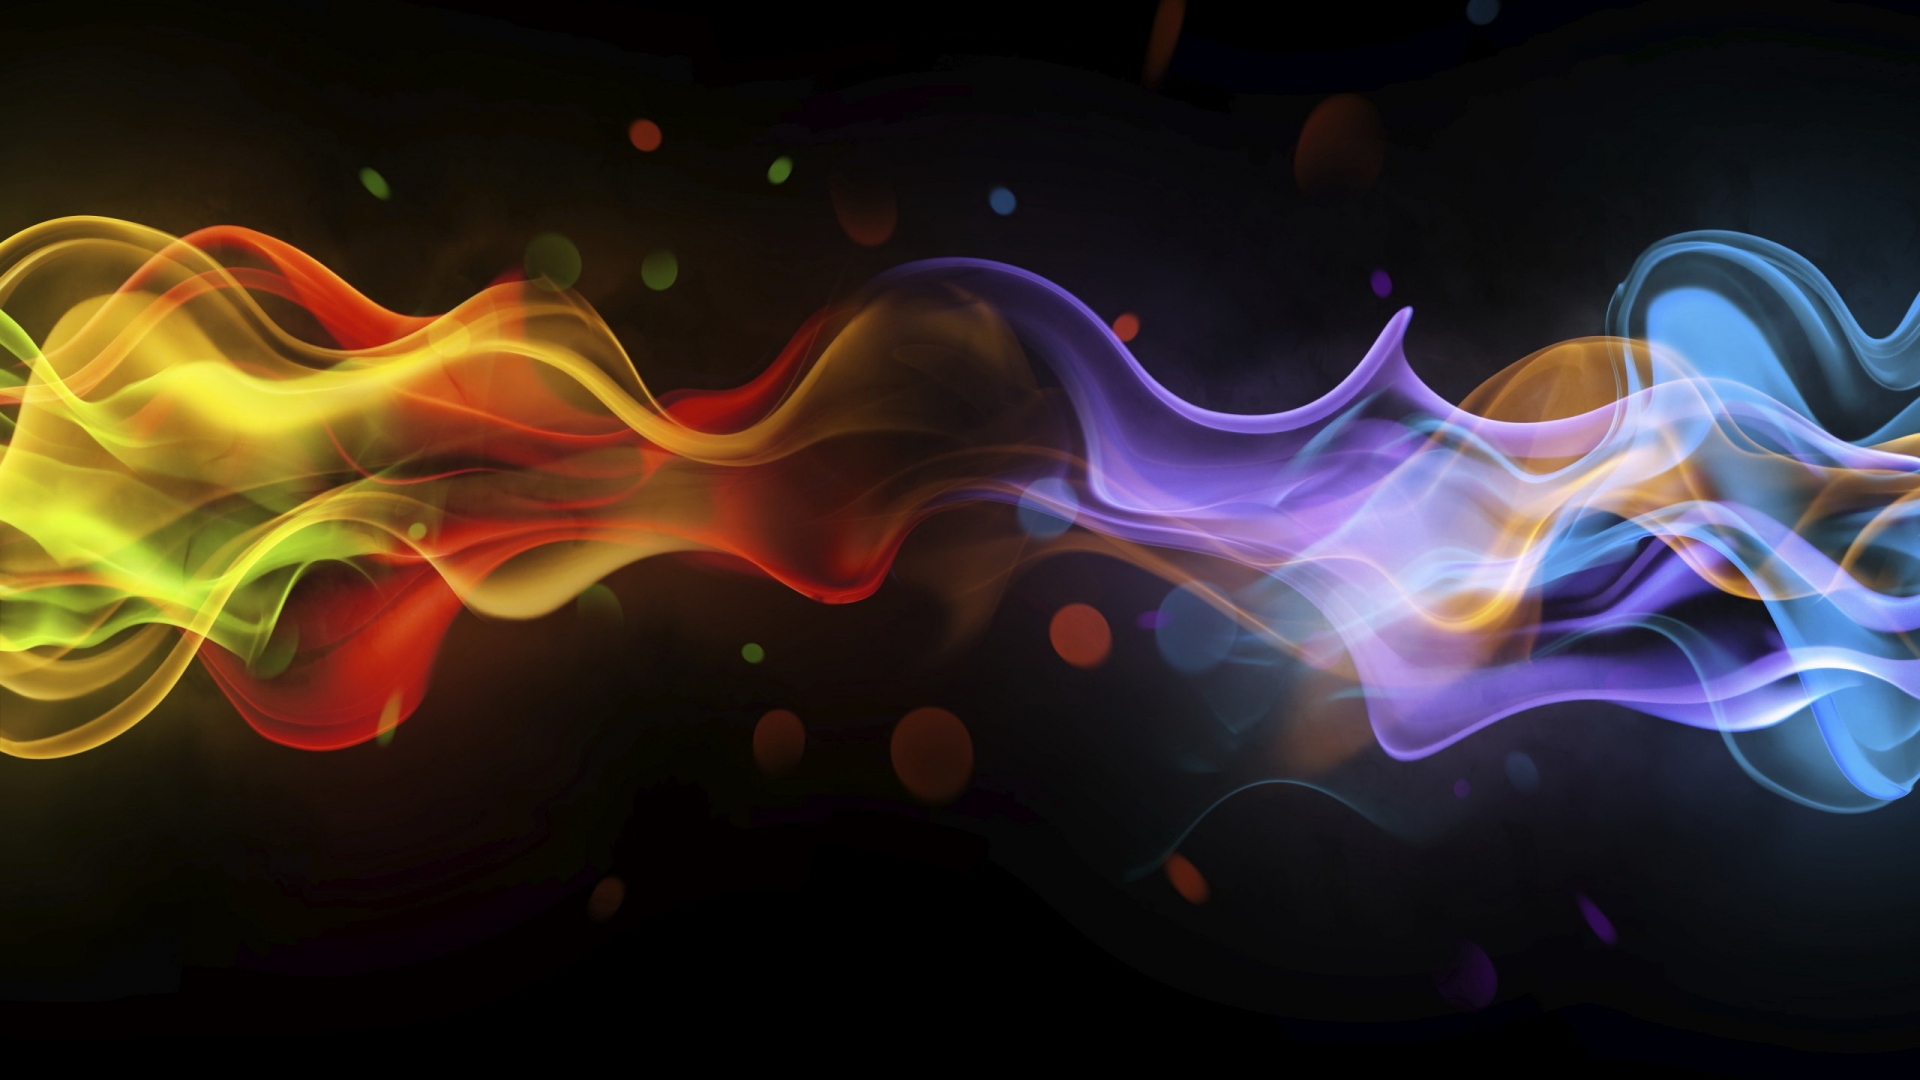 Colored Smoke for 1920 x 1080 HDTV 1080p resolution